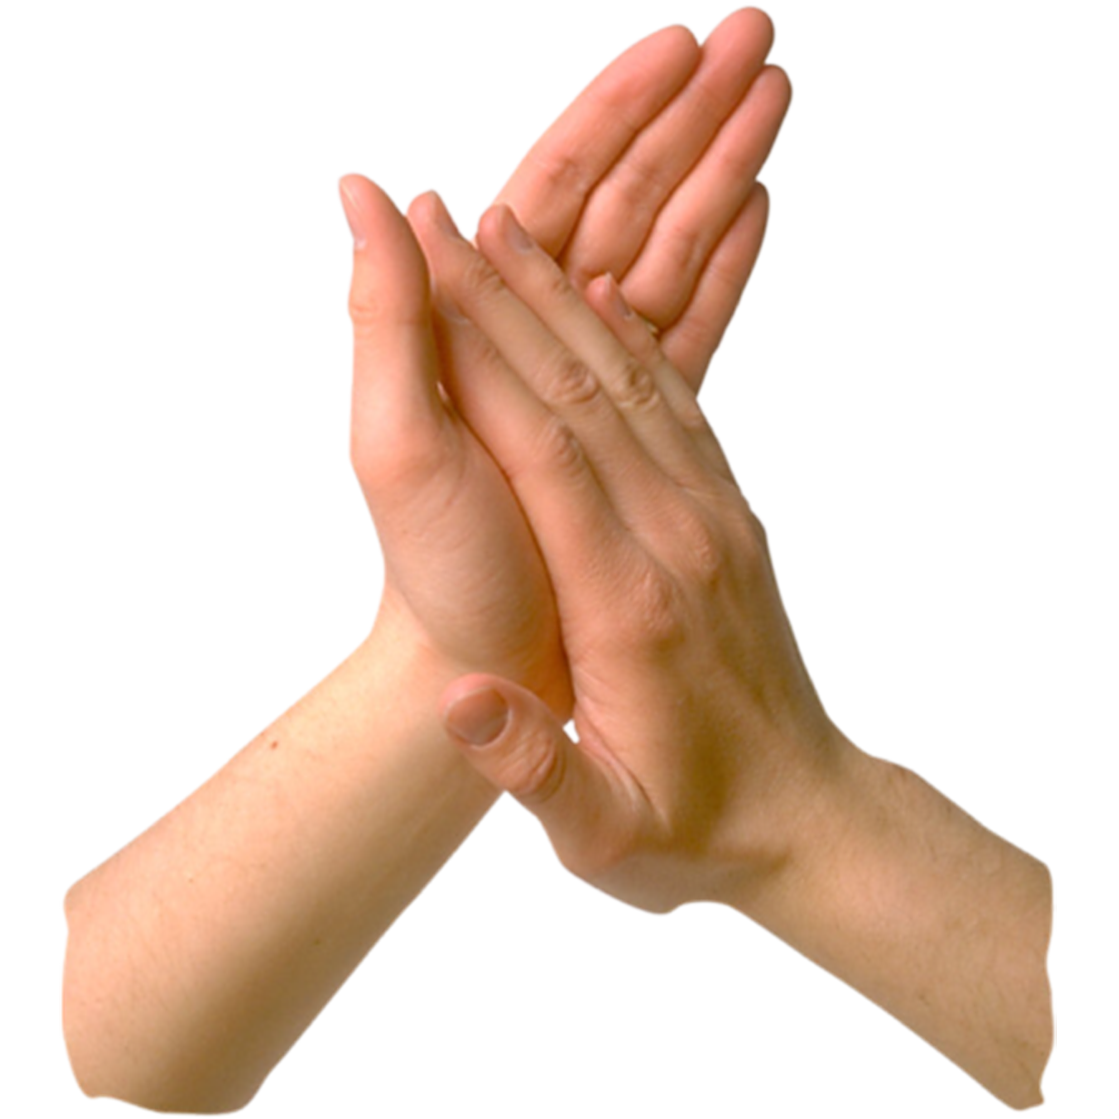 Clapping-Hands-PNG-High-Quality-Image.pn